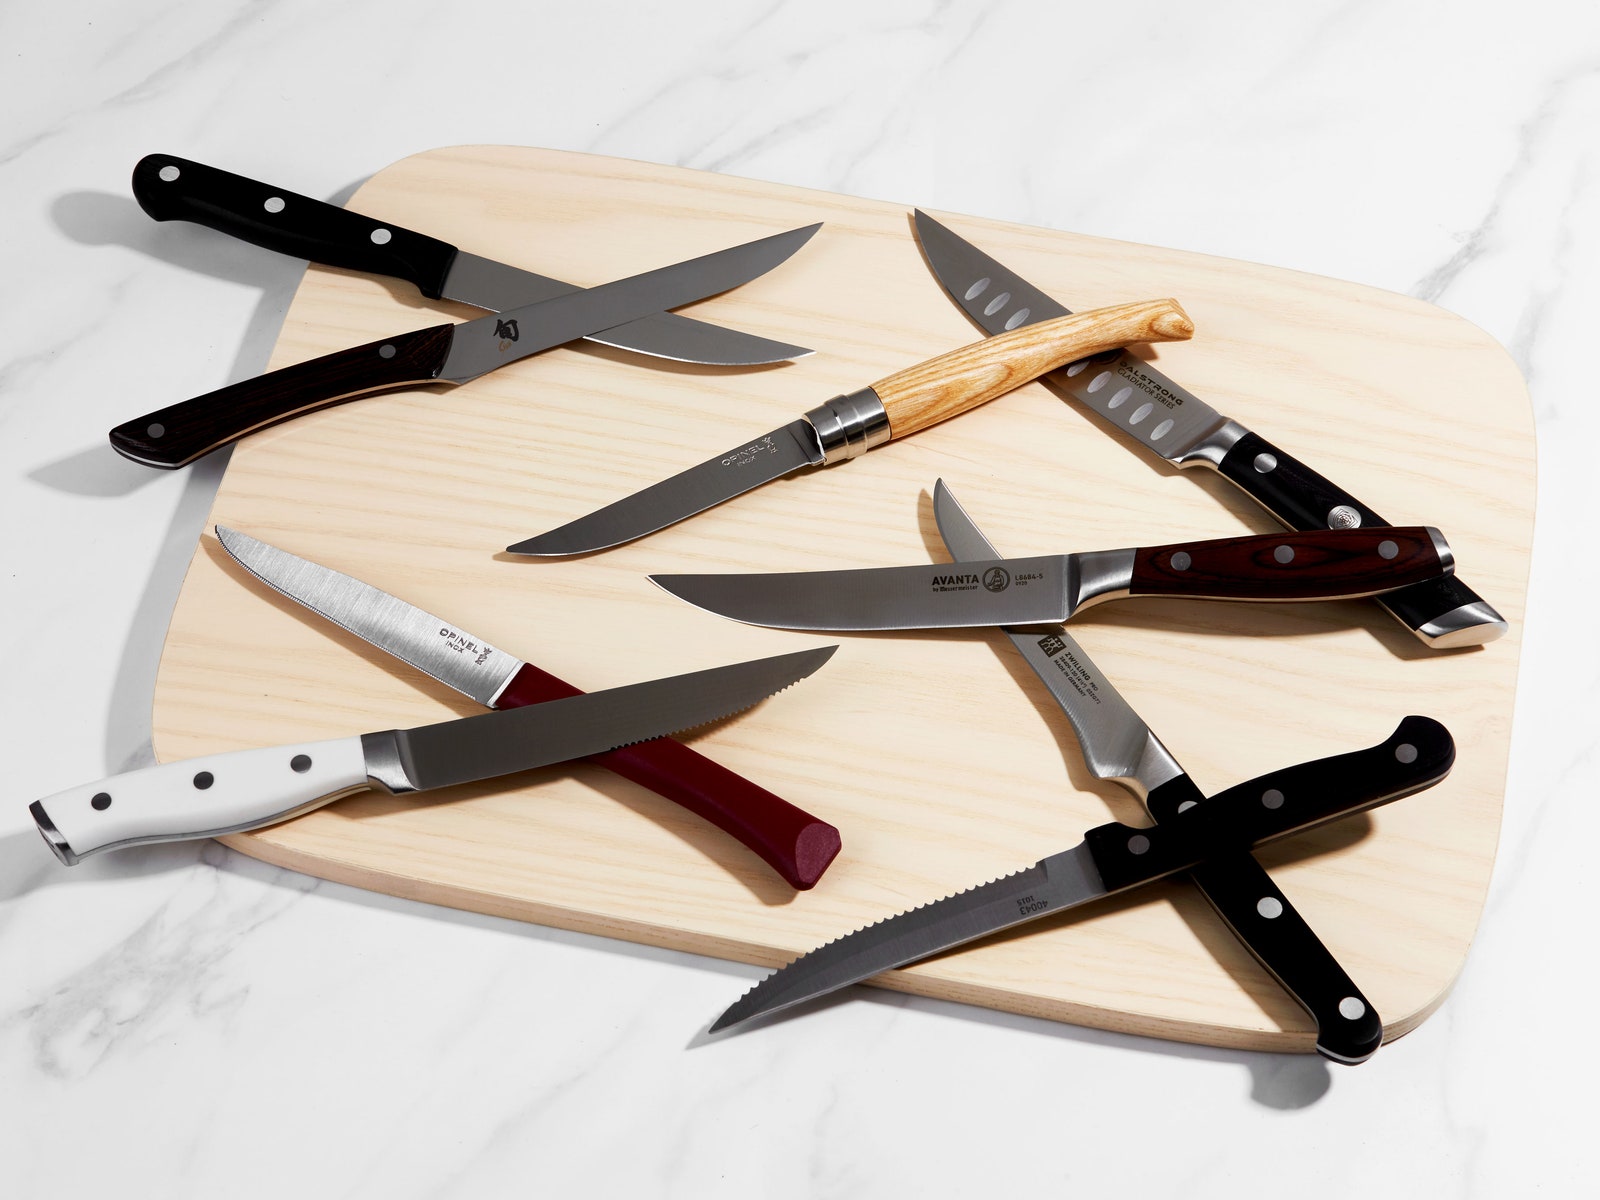 These Amazon Prime Day Knife Deals Look Sharp